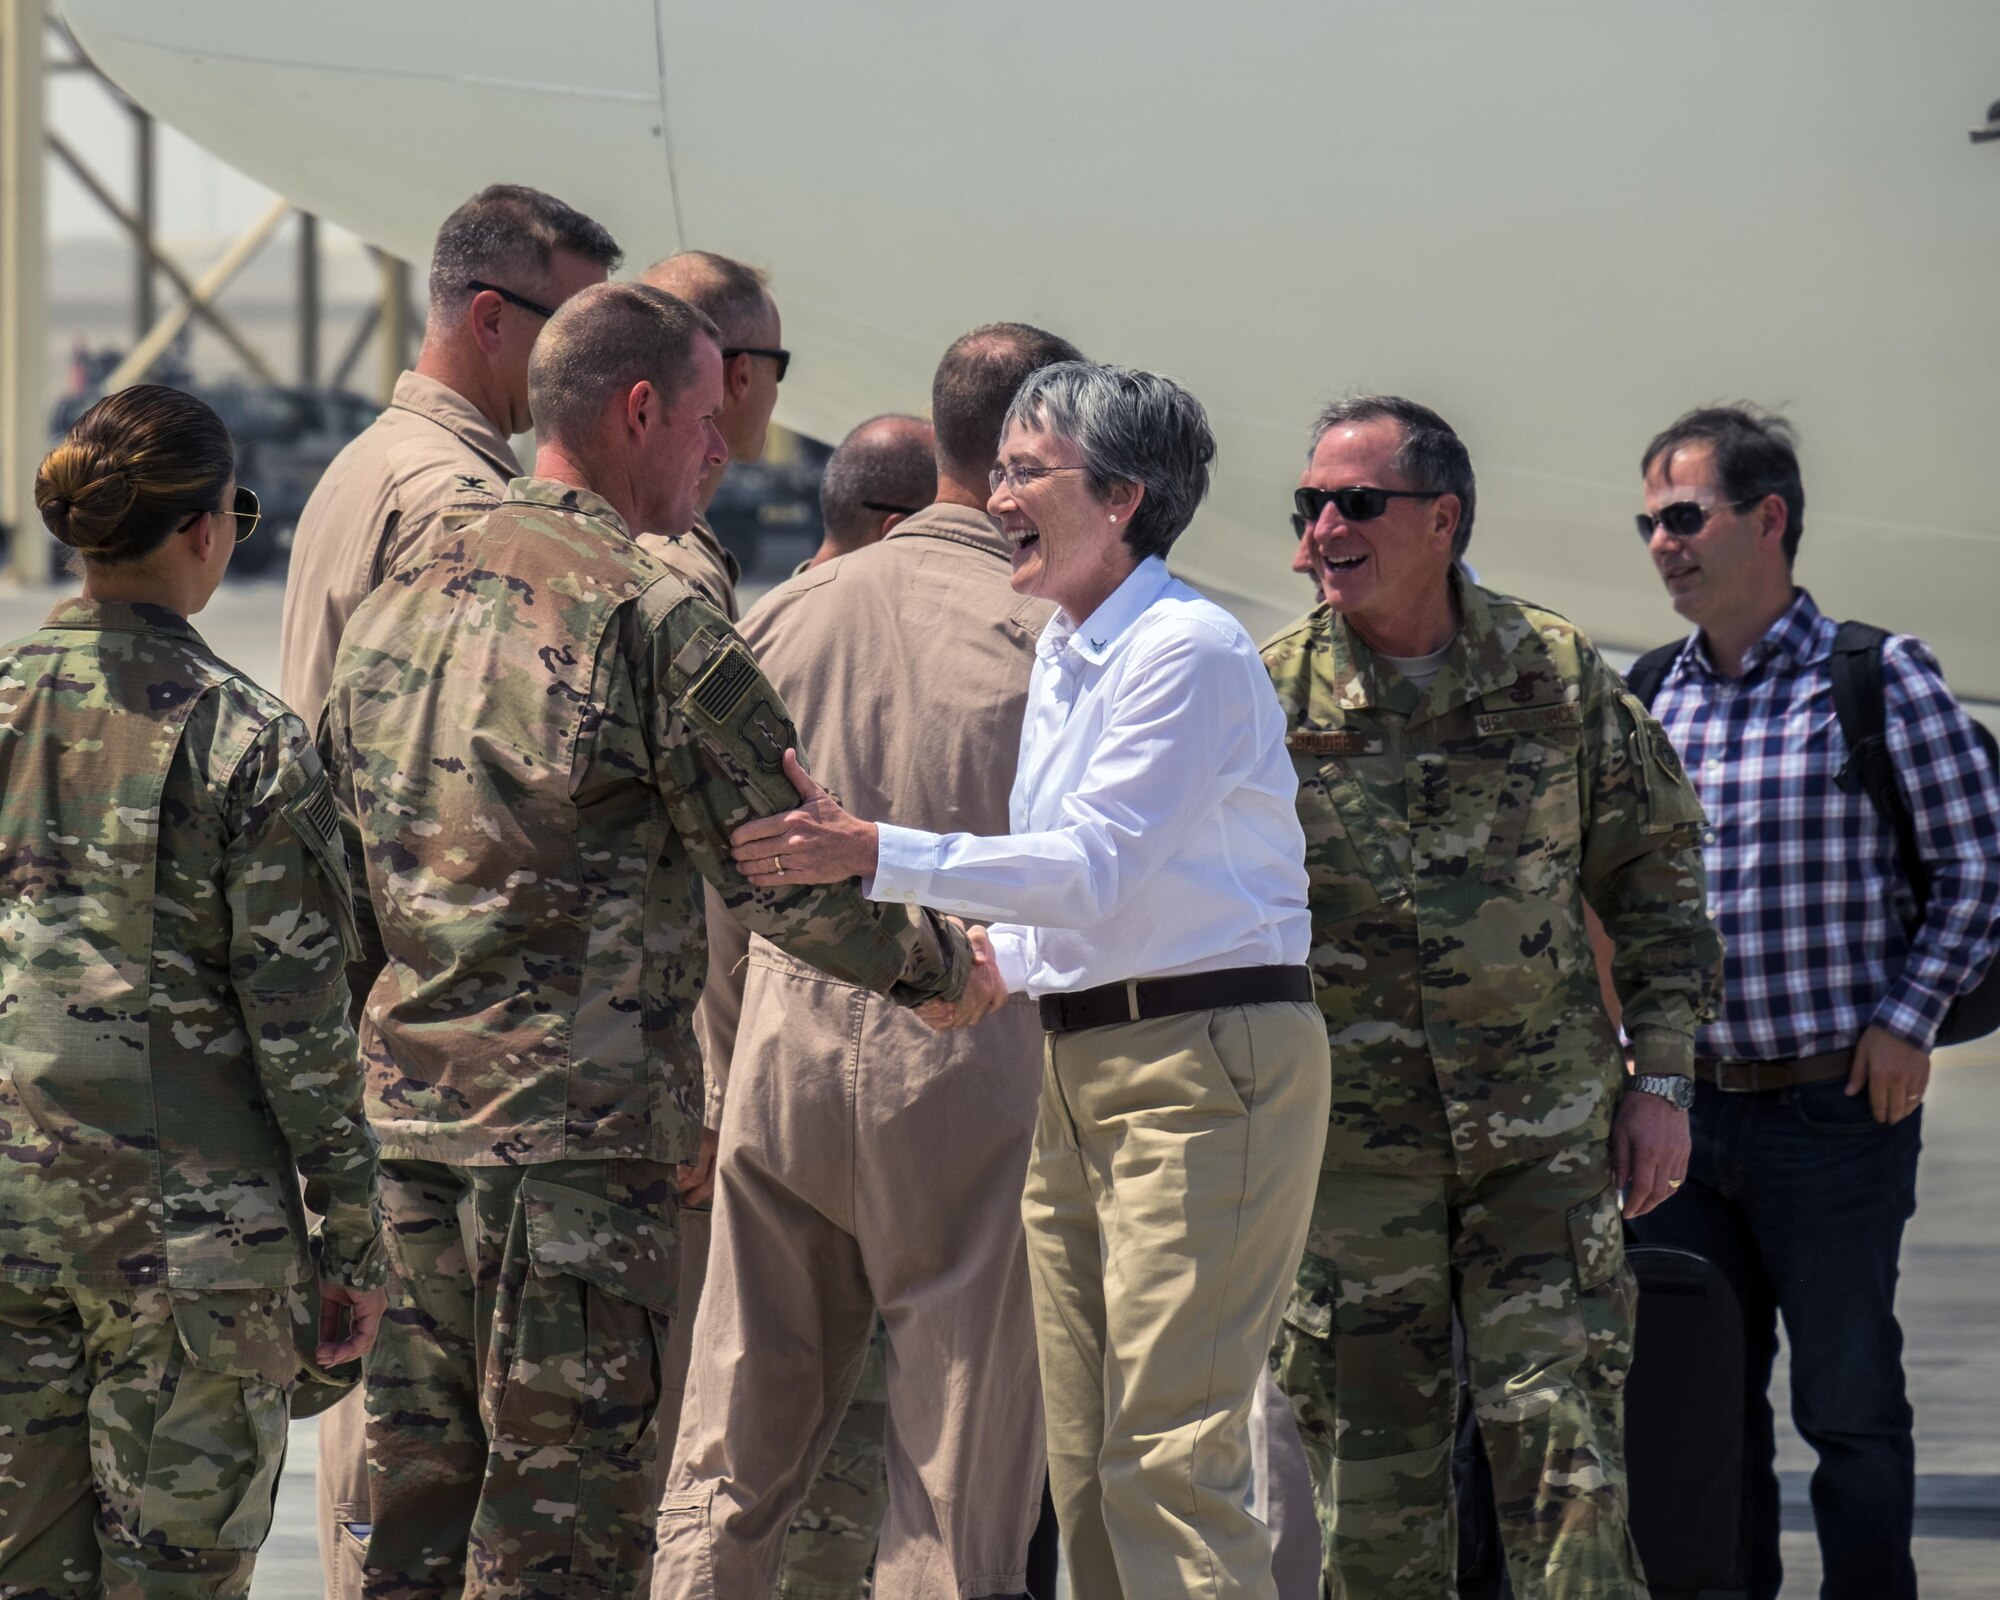 Secretary of the Air Force Heather Wilson, center, and Air Force Chief of Staff Gen. David L. Goldfein are greeted by 380th Air Expeditionary Wing leadership Aug. 18, 2017, Al Dhafra Air Base, United Arab Emirates.